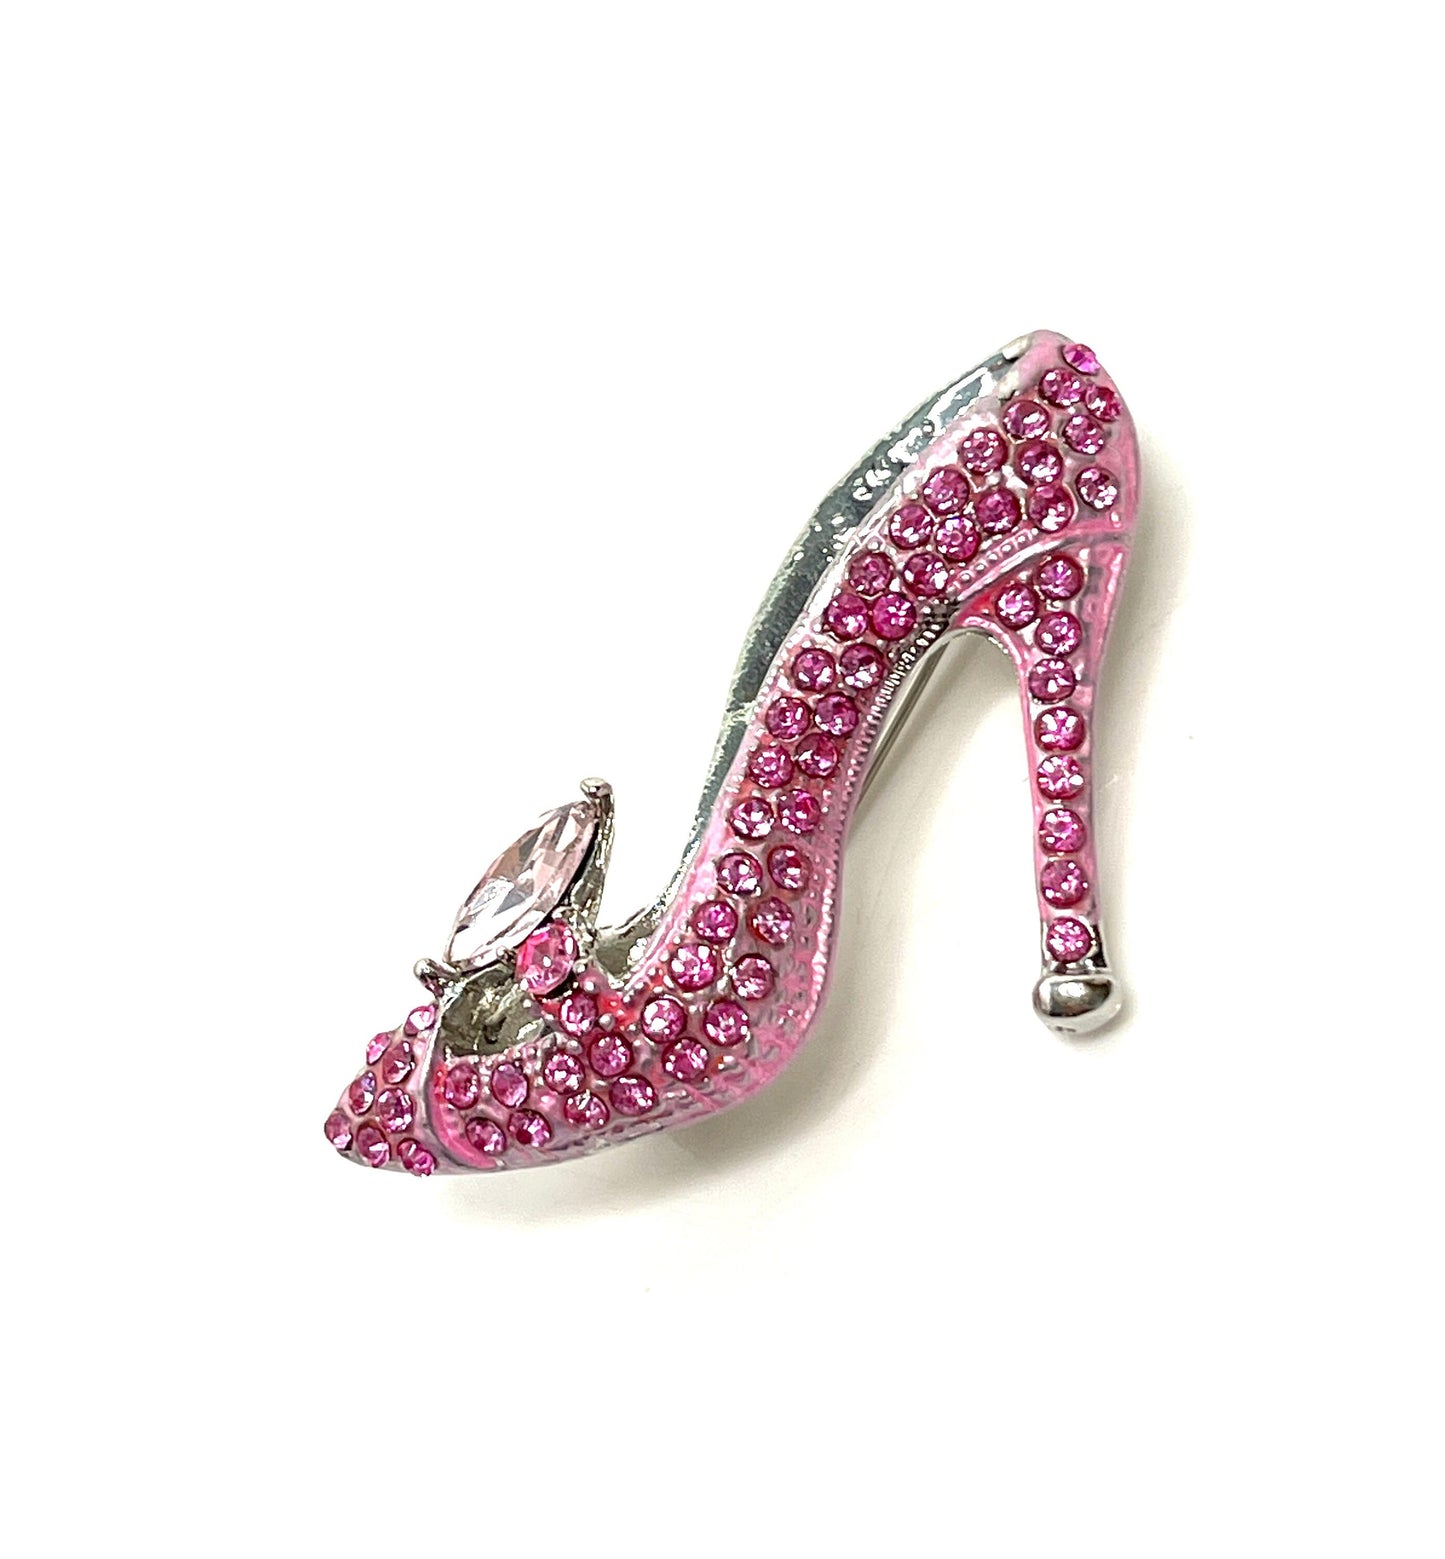 Beautiful Pink Stiletto Shoe Brooch | Sparkly Pink Crystal Shoe Pin